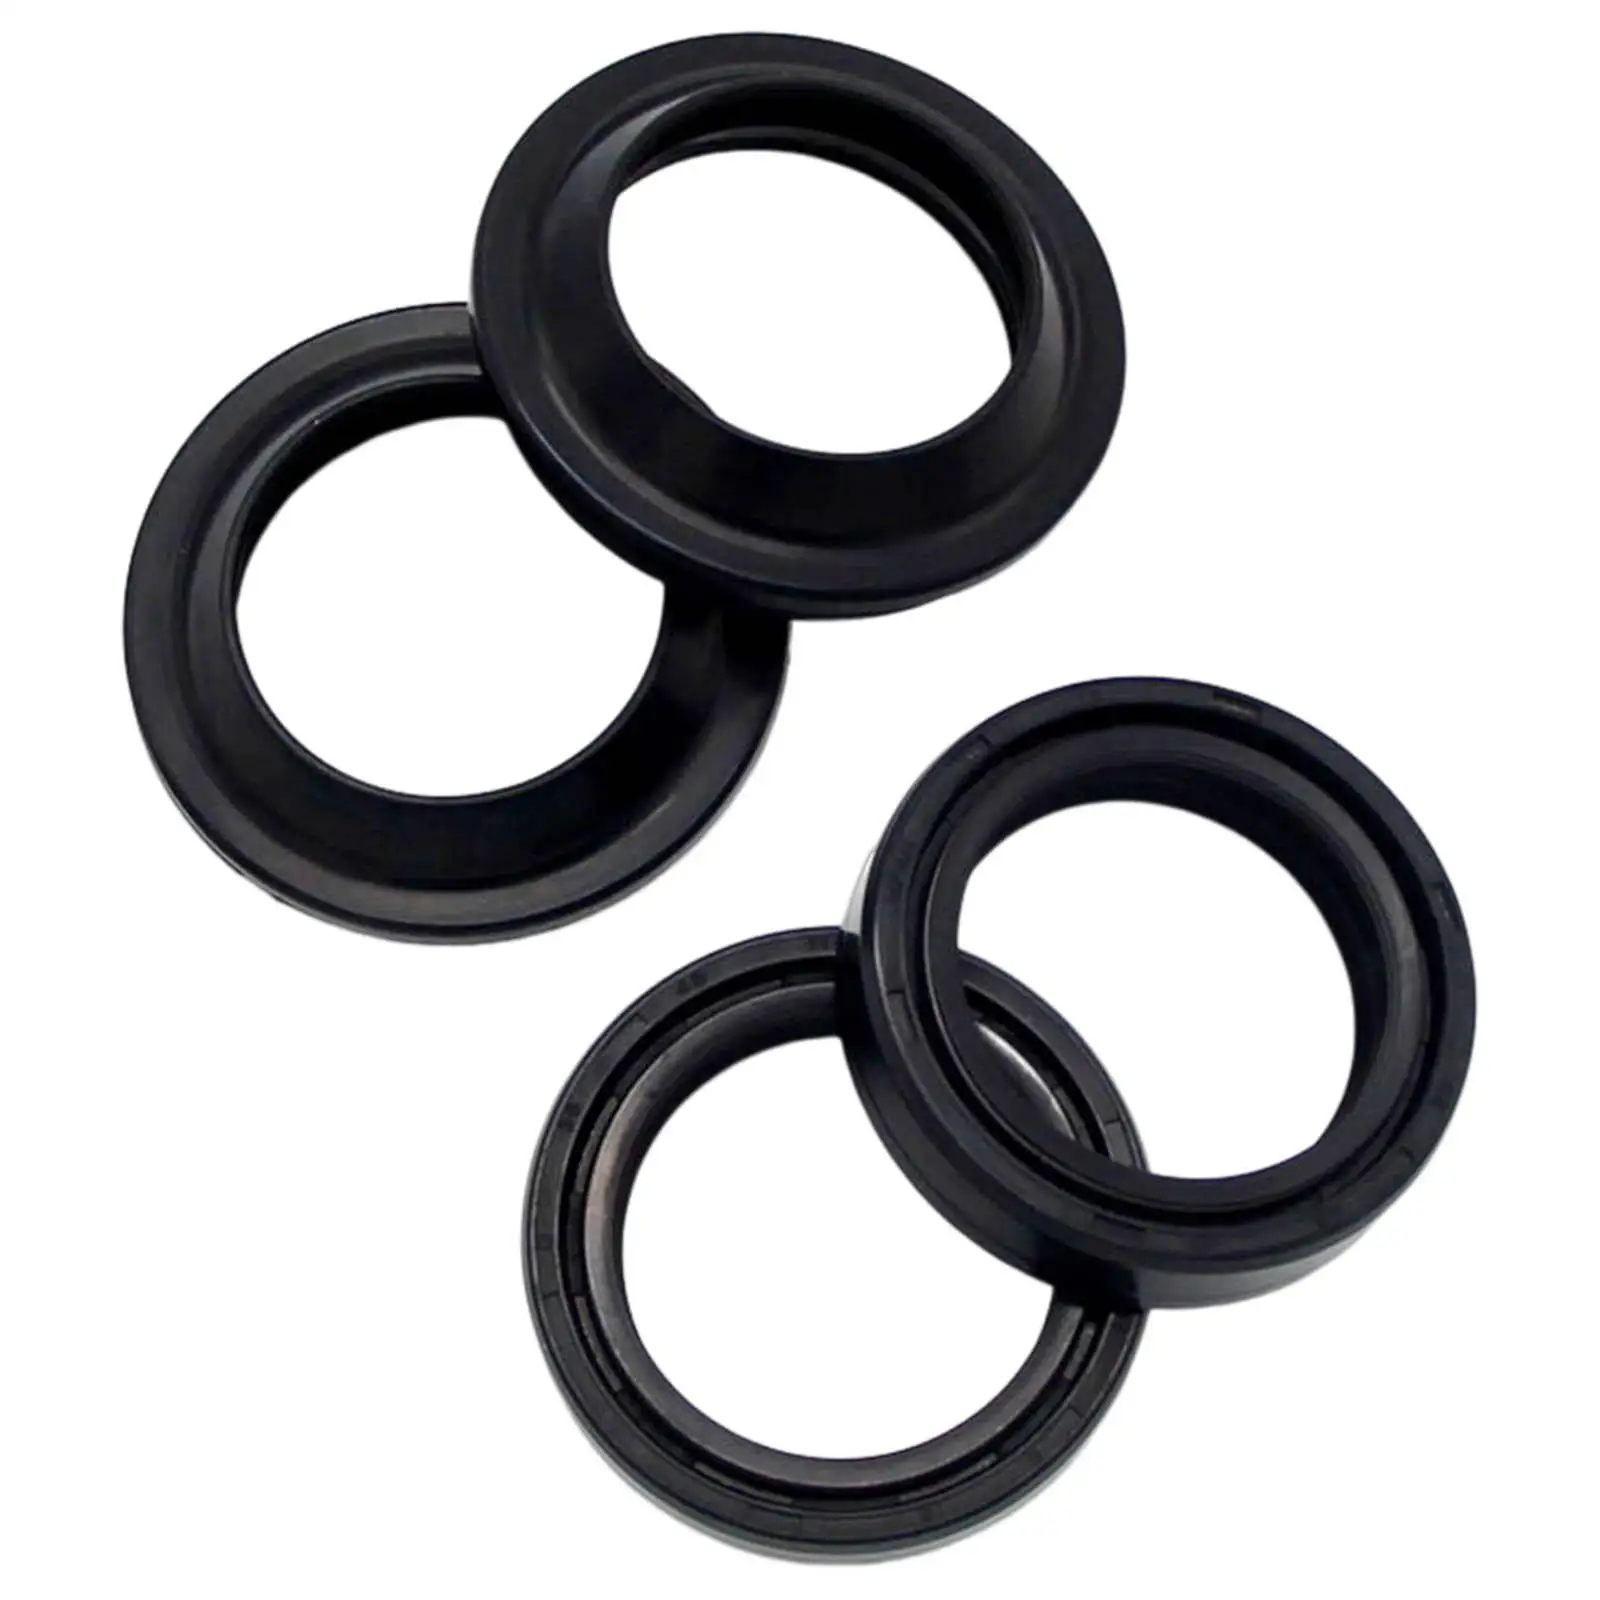 Motorcycle Front Fork Oil Seal and Dust Seal Kit 35x48x11mm Good Performance Replacements for Honda CB650C Custom 1980-1981